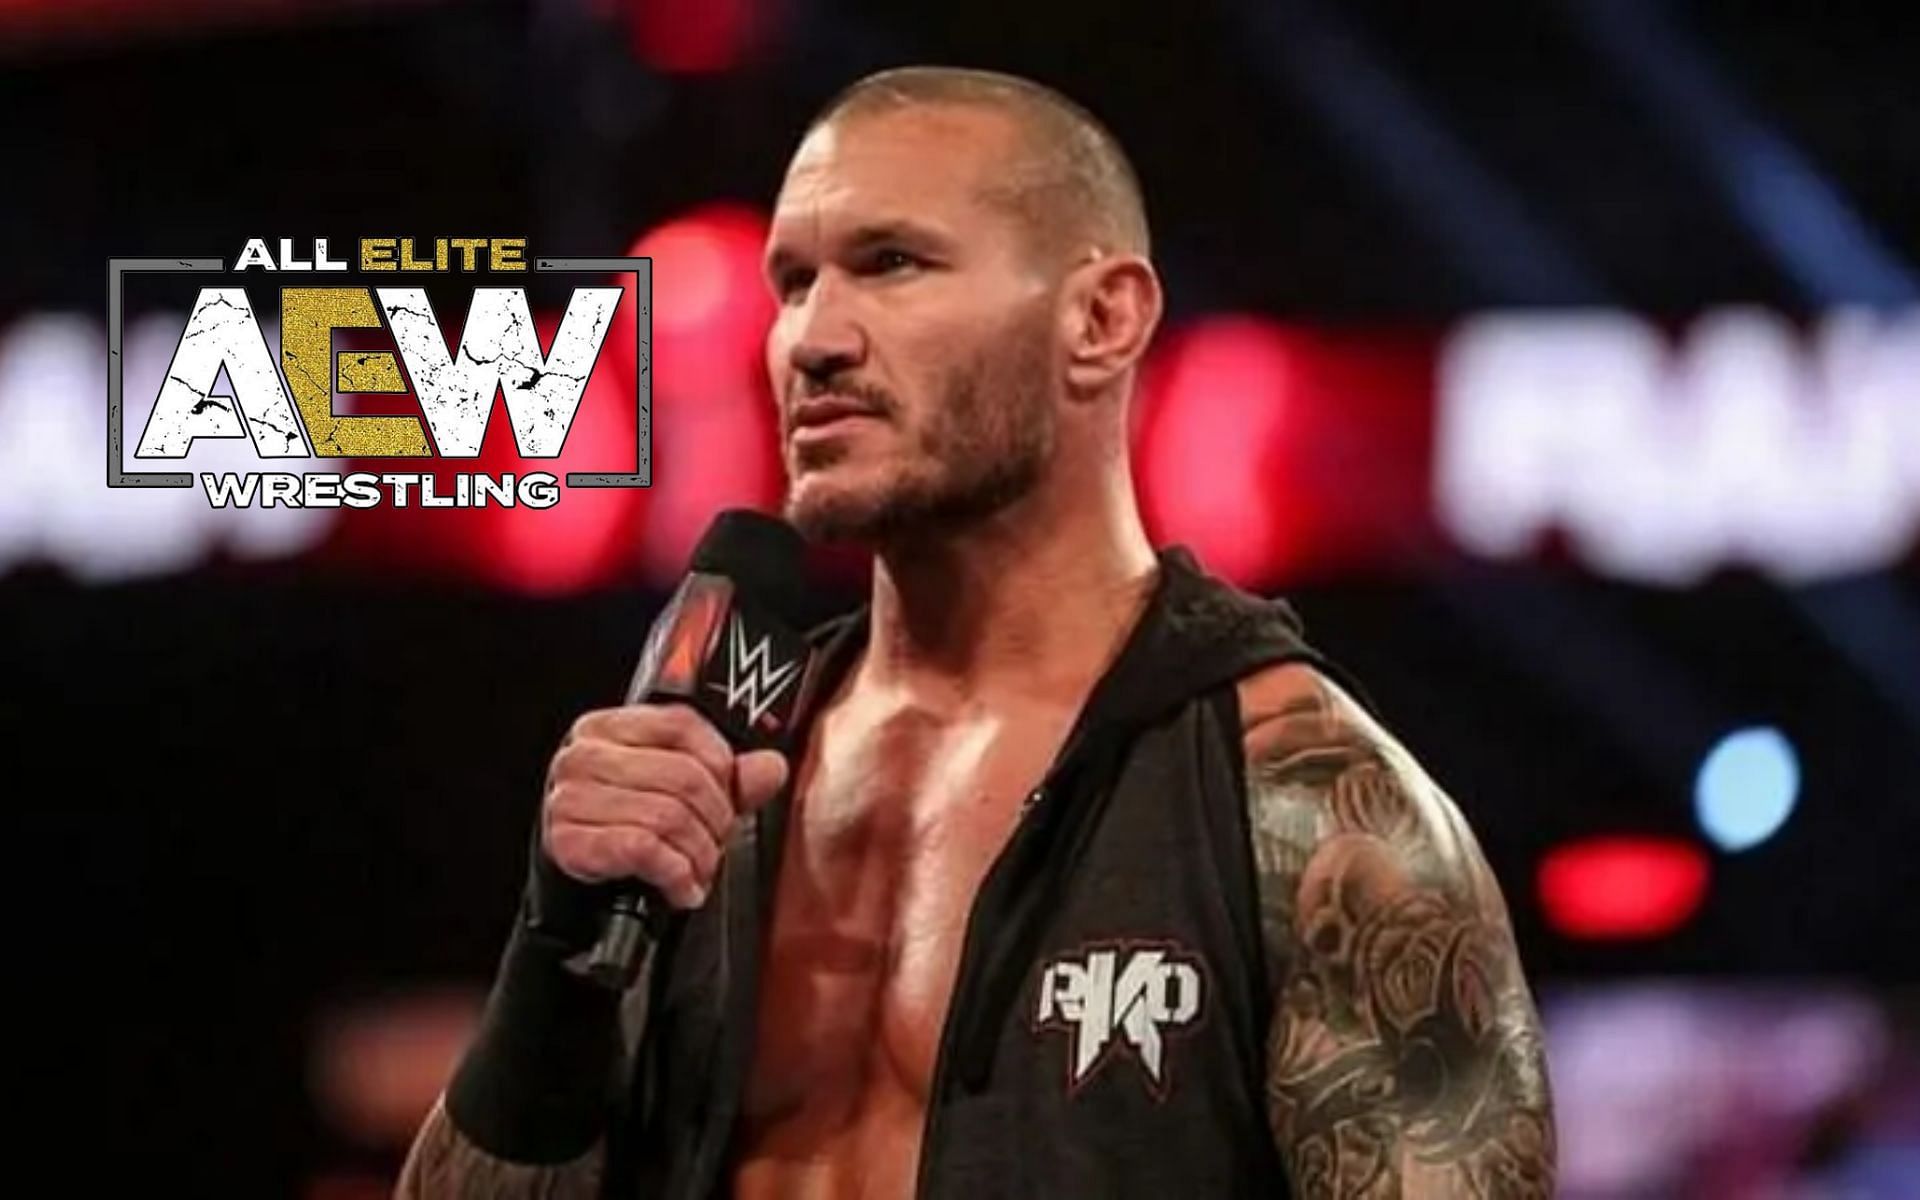 WWE Superstar Randy Orton is sidelined with an injury.